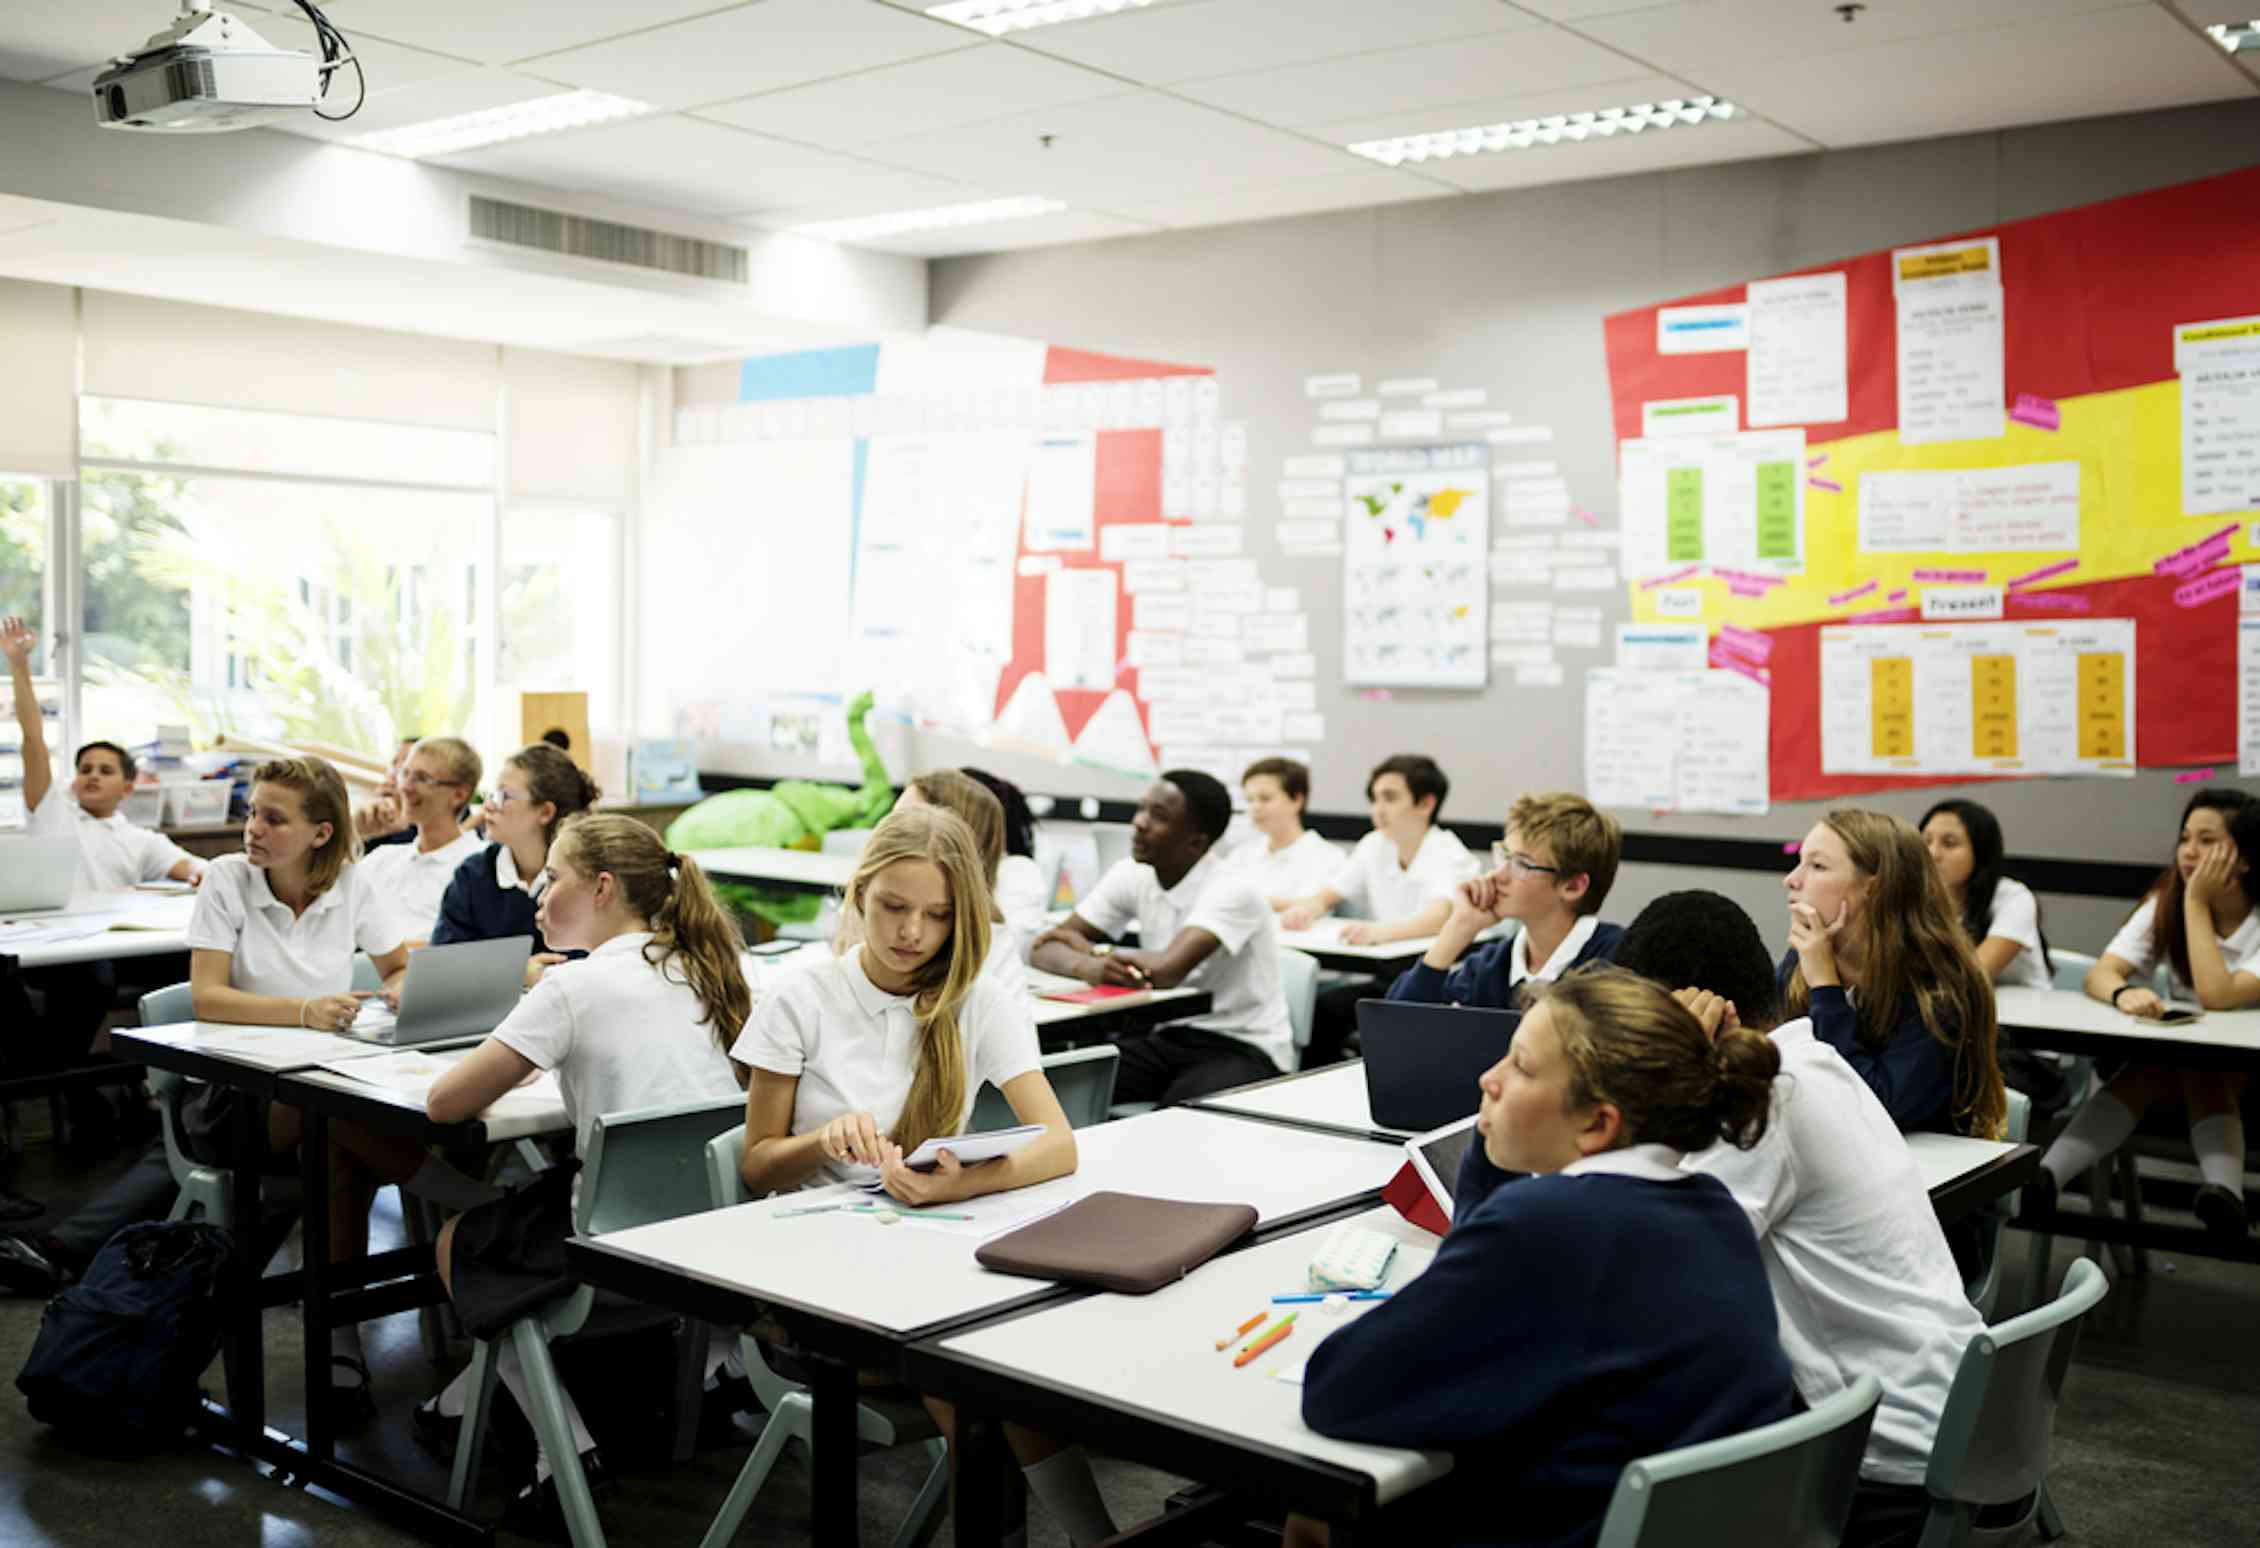 Are Australian Classrooms Really The Most Disruptive In The World Not If You Look At The Whole